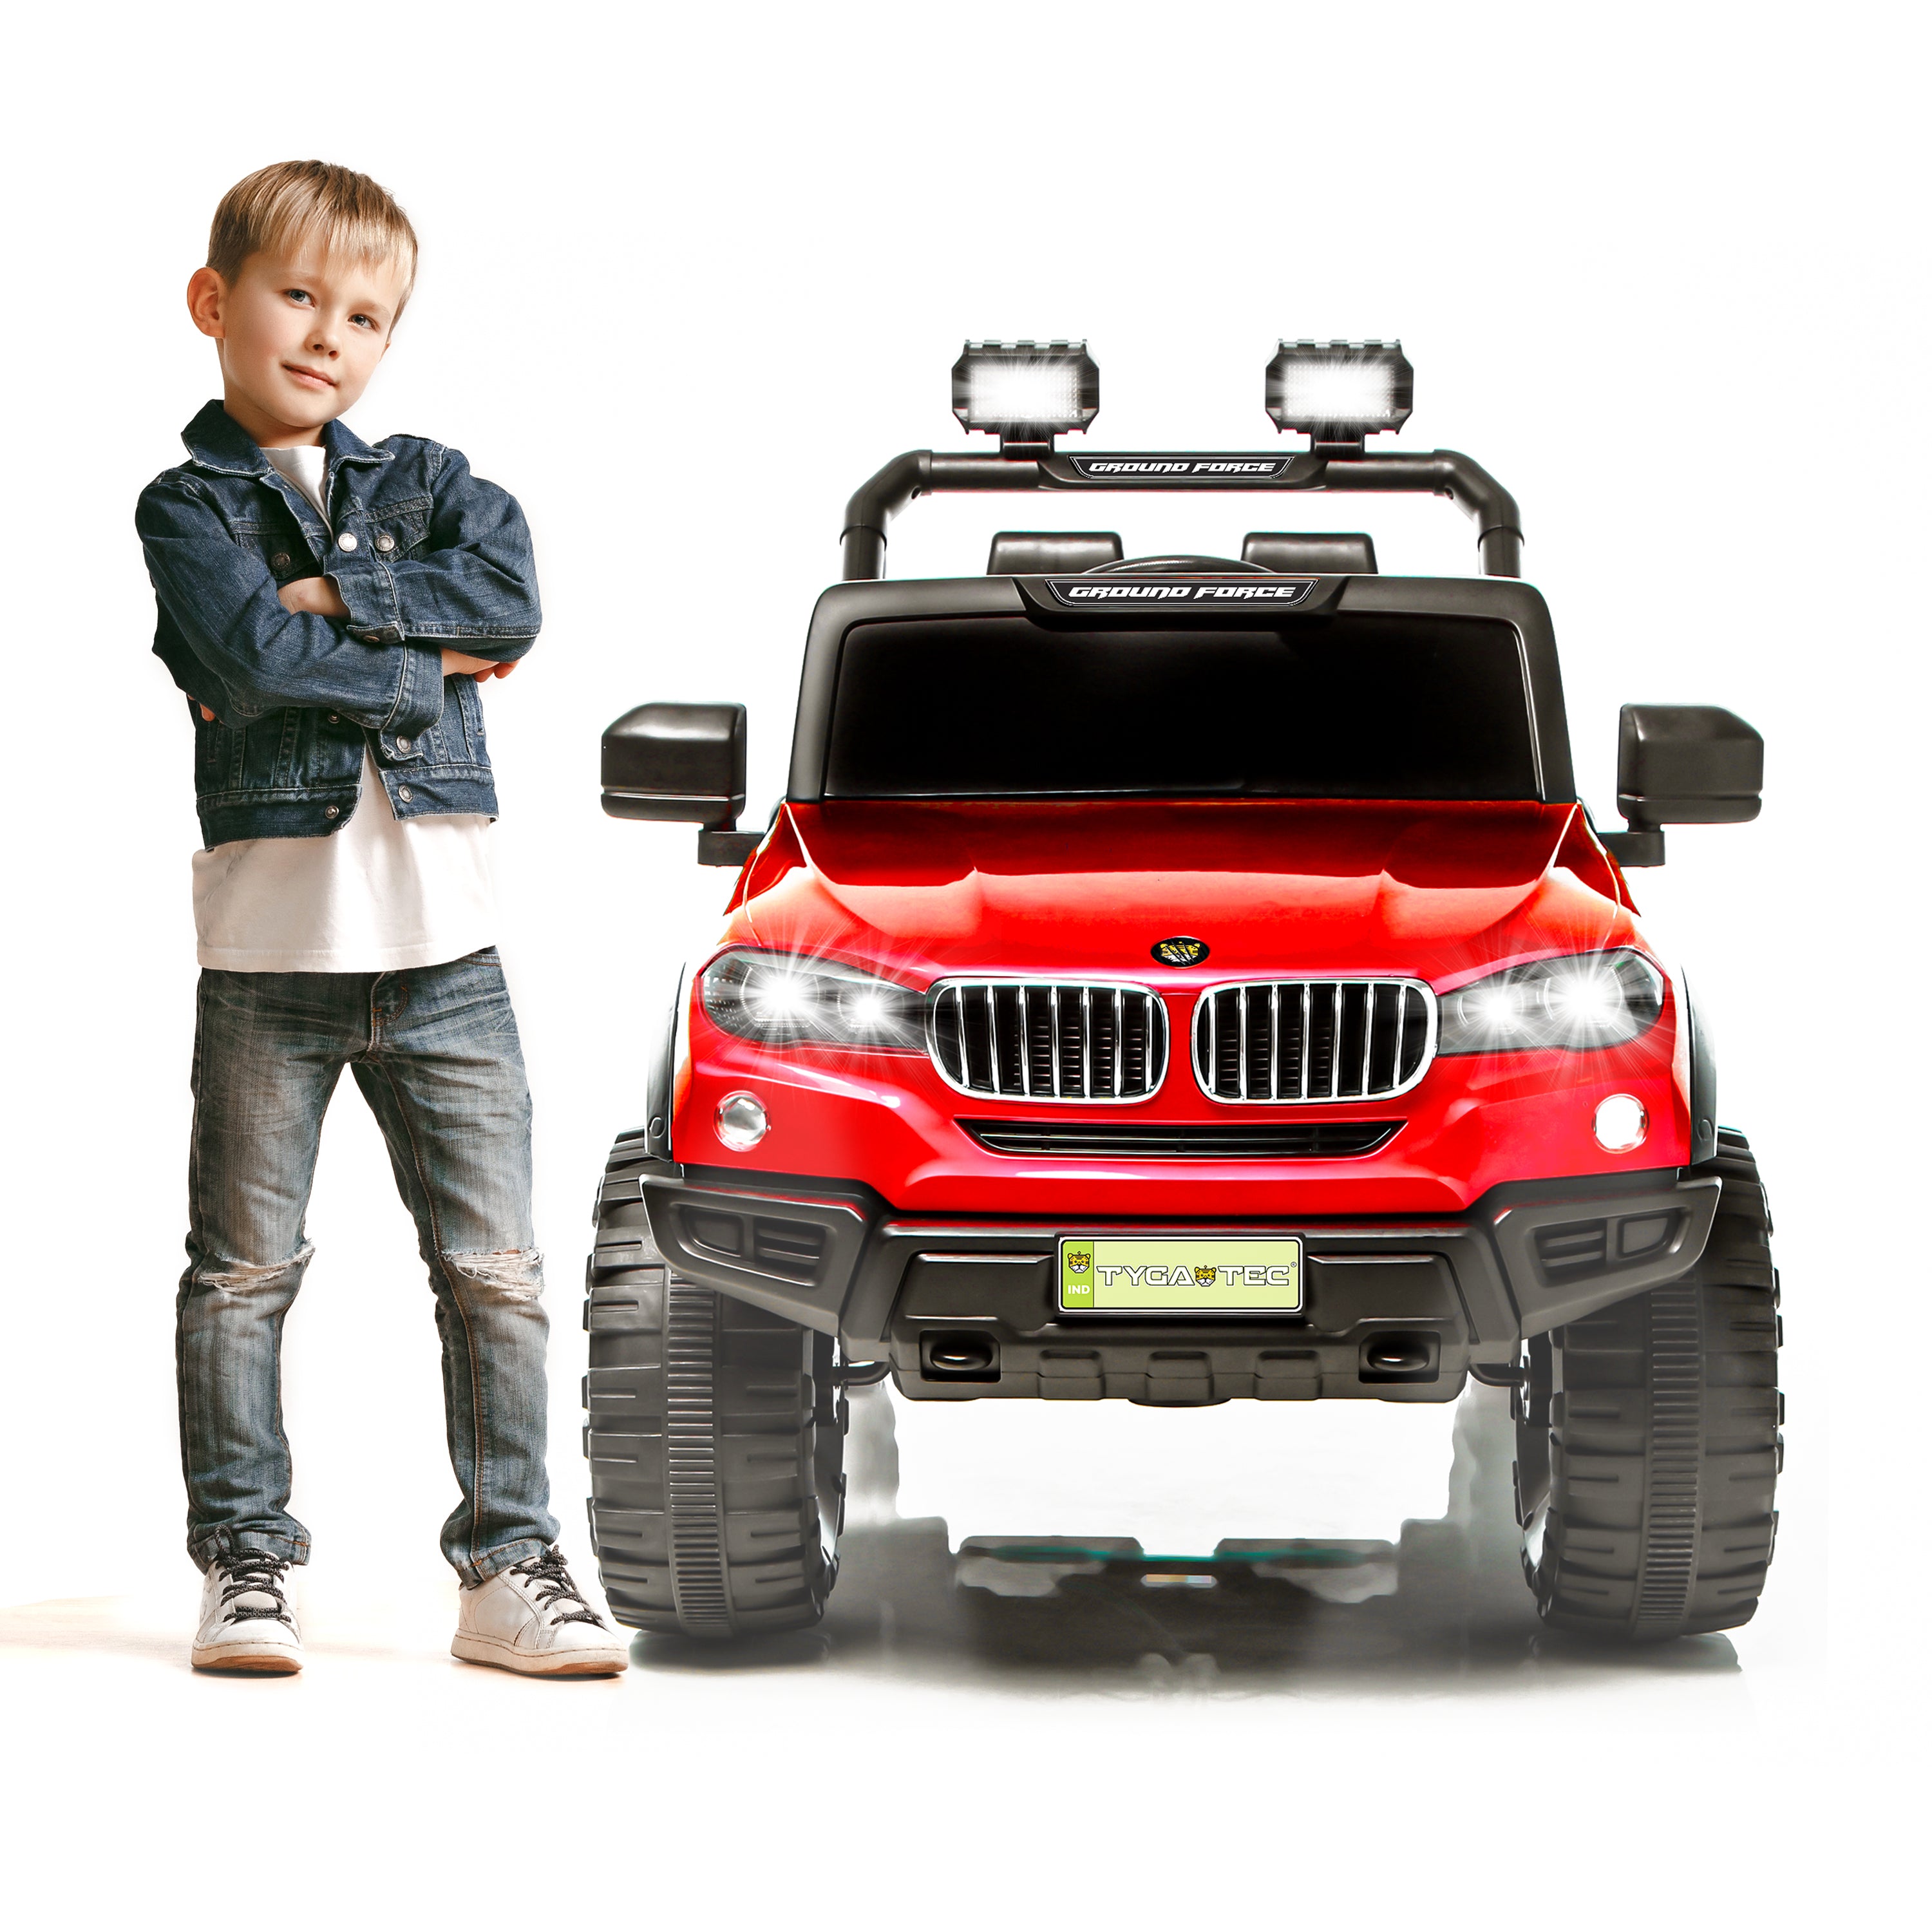 Tygatec Ride-on Kids Car Ground Force SPARKY (RED COLOUR)